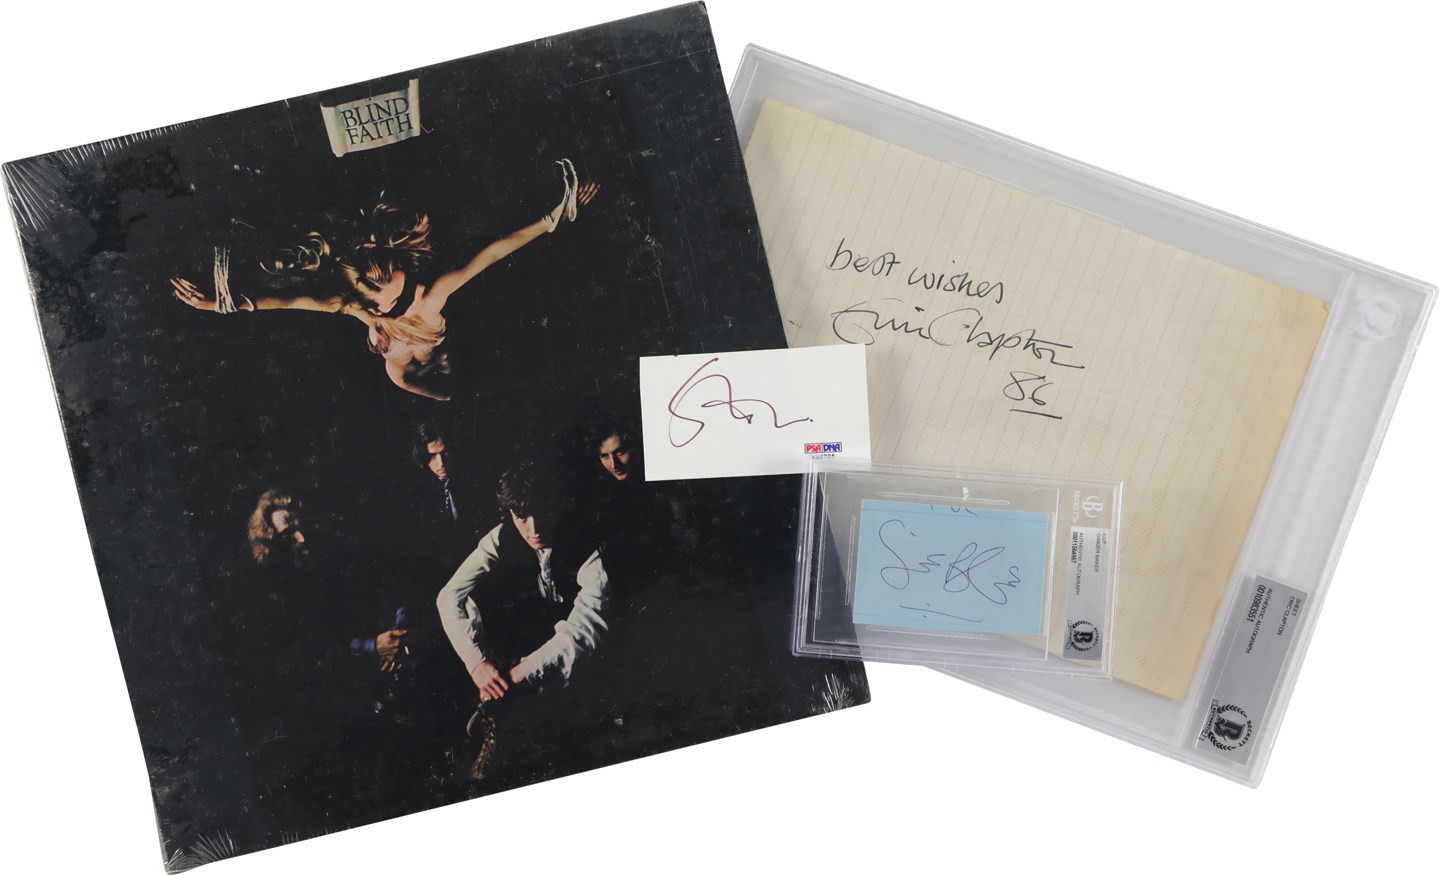 - Blind Faith Complete Autograph Collection with One of the Best Vintage Eric Clapton Full Name Signatures